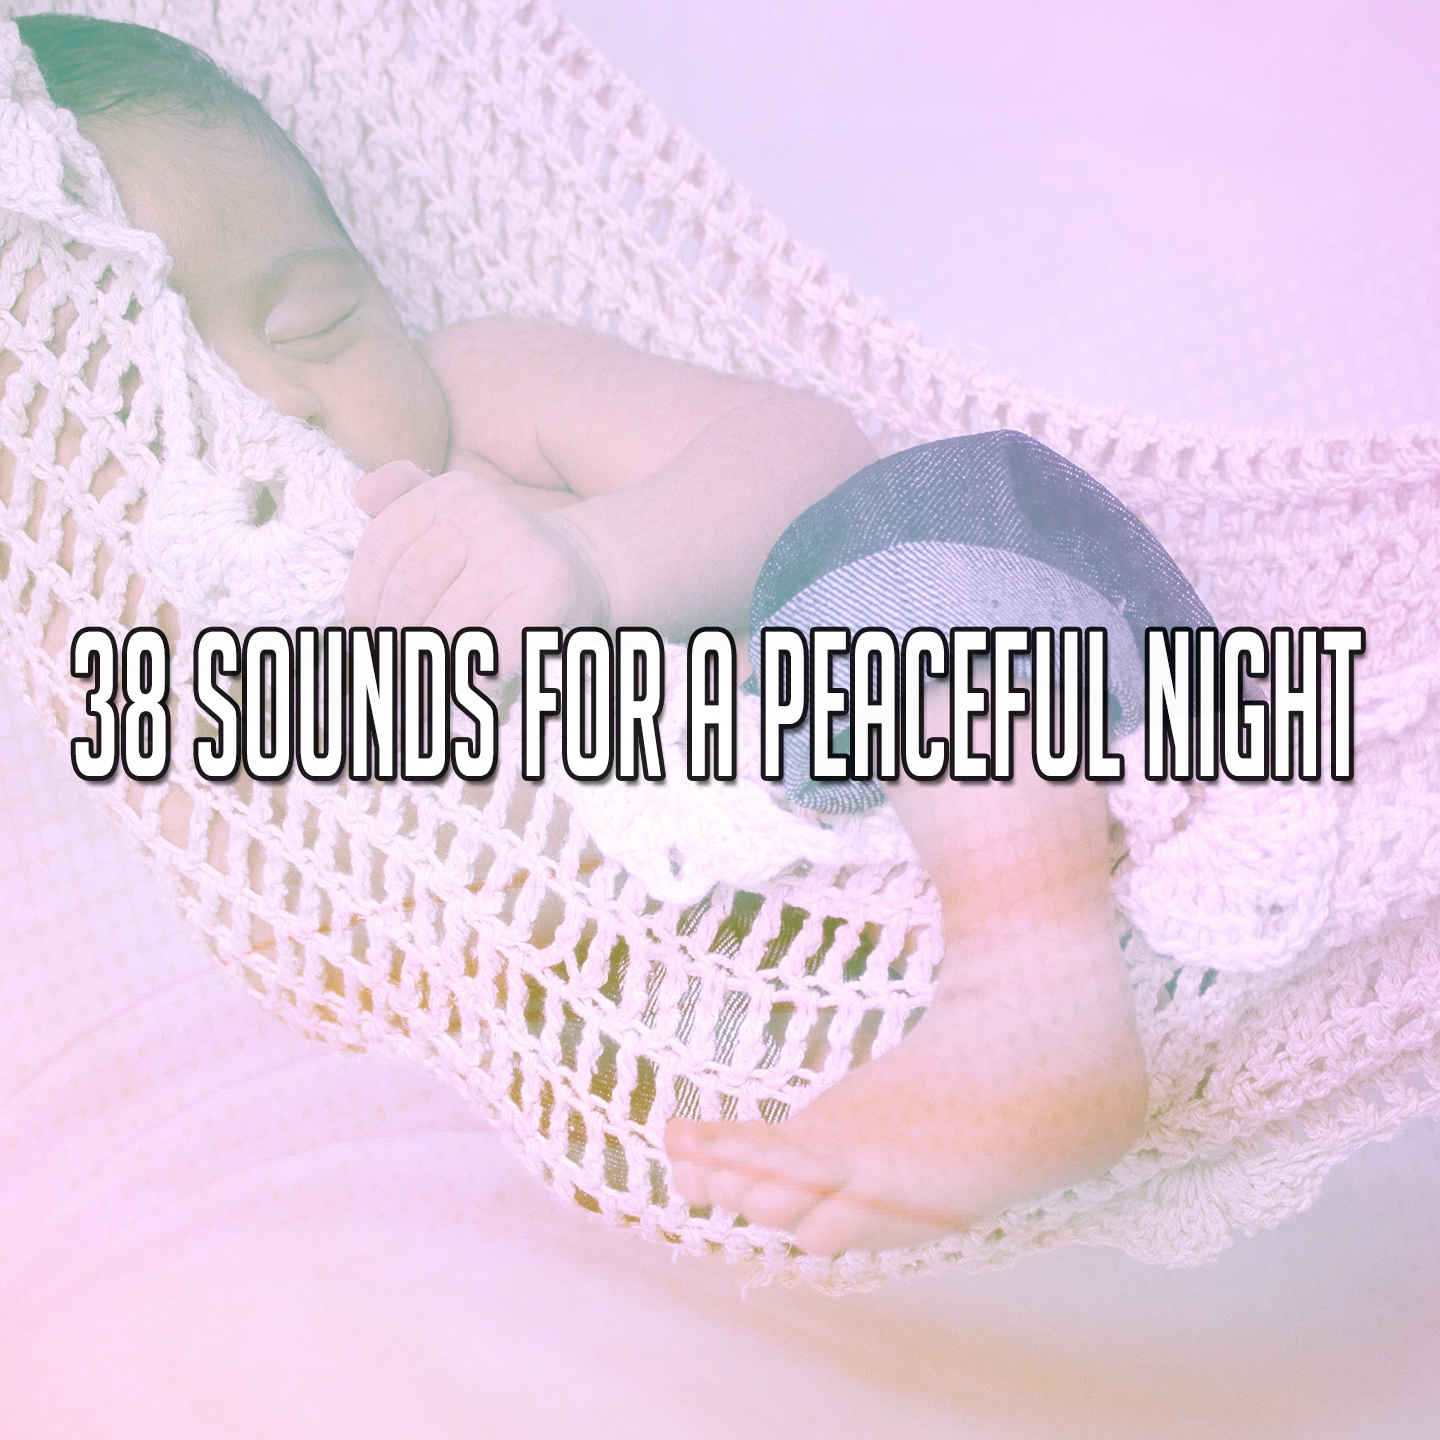 38 Sounds For A Peaceful Night